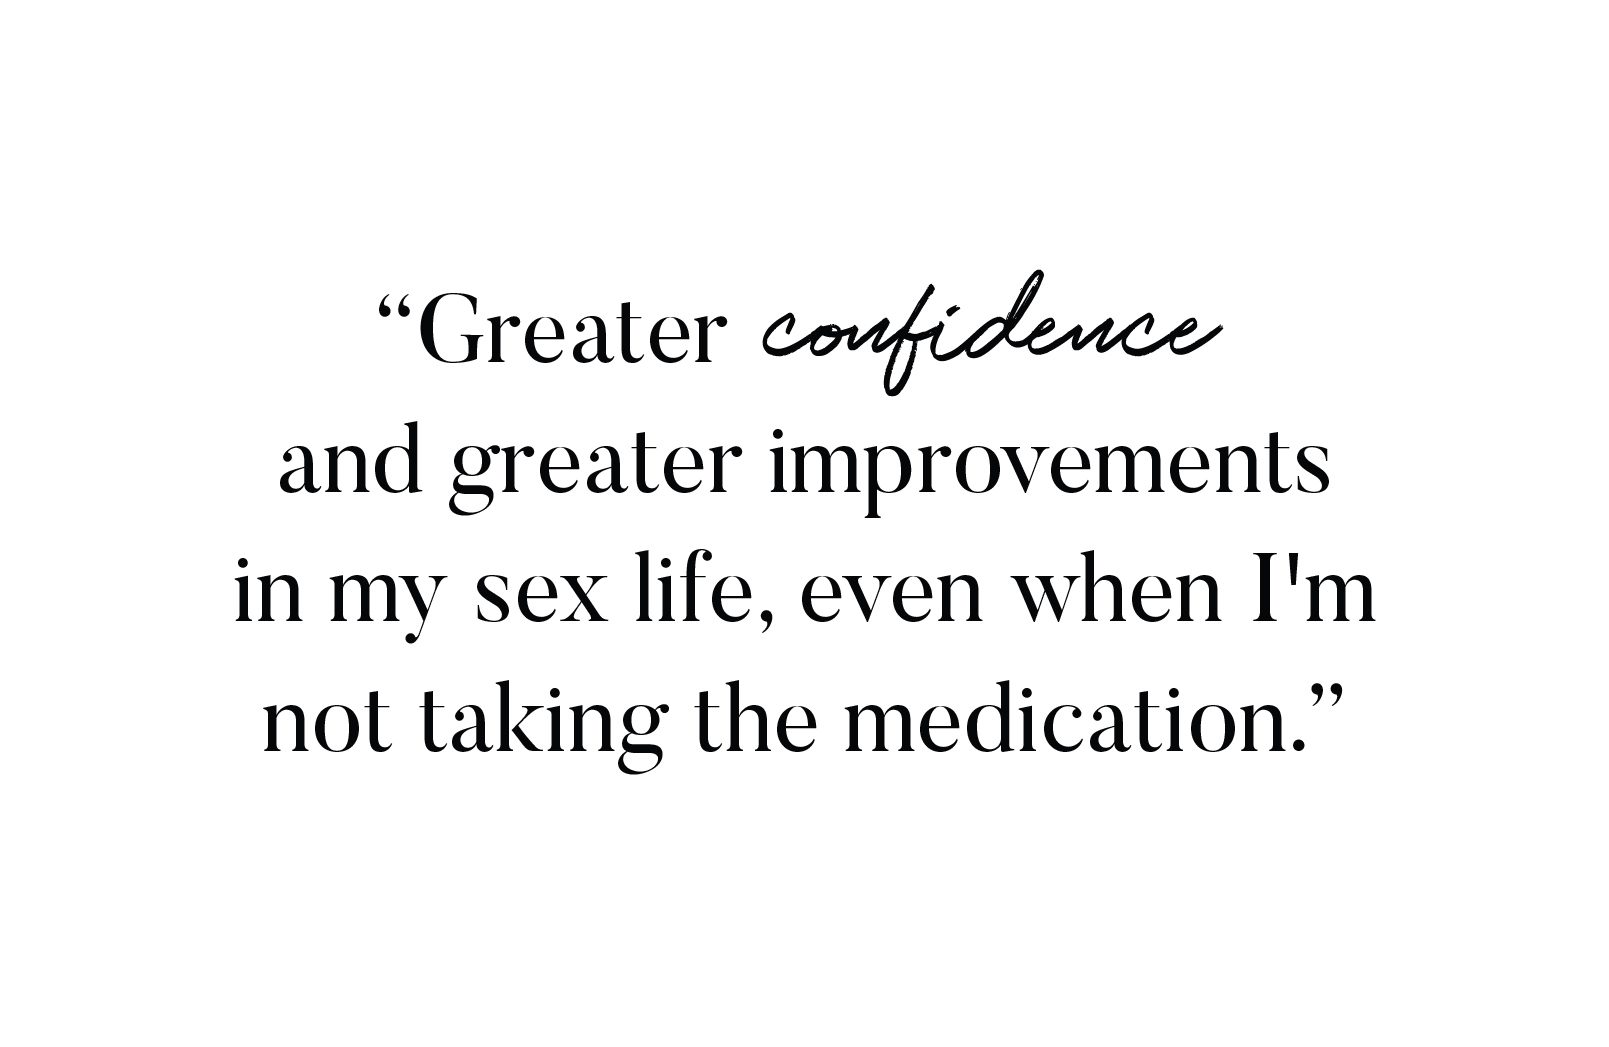 "Greater confidence and greater improvements in my sex life, even when I'm not taking the medication."